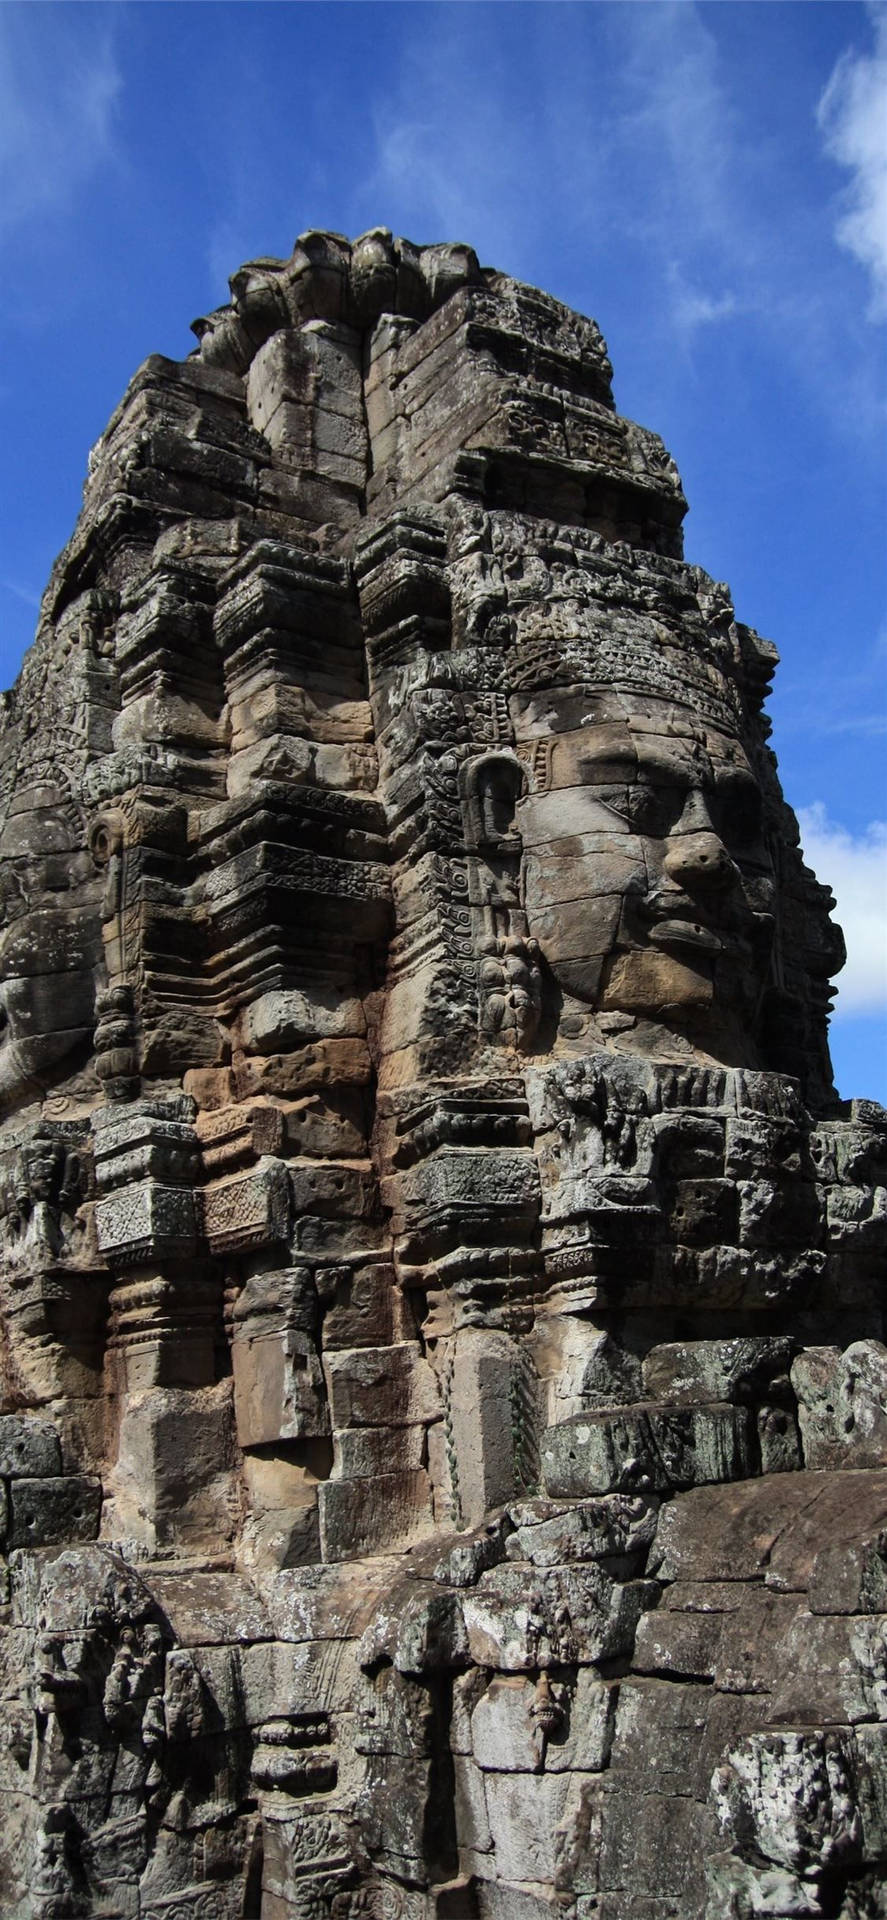 Caption: Astounding Architecture And Stone Carving At Angkor Wat